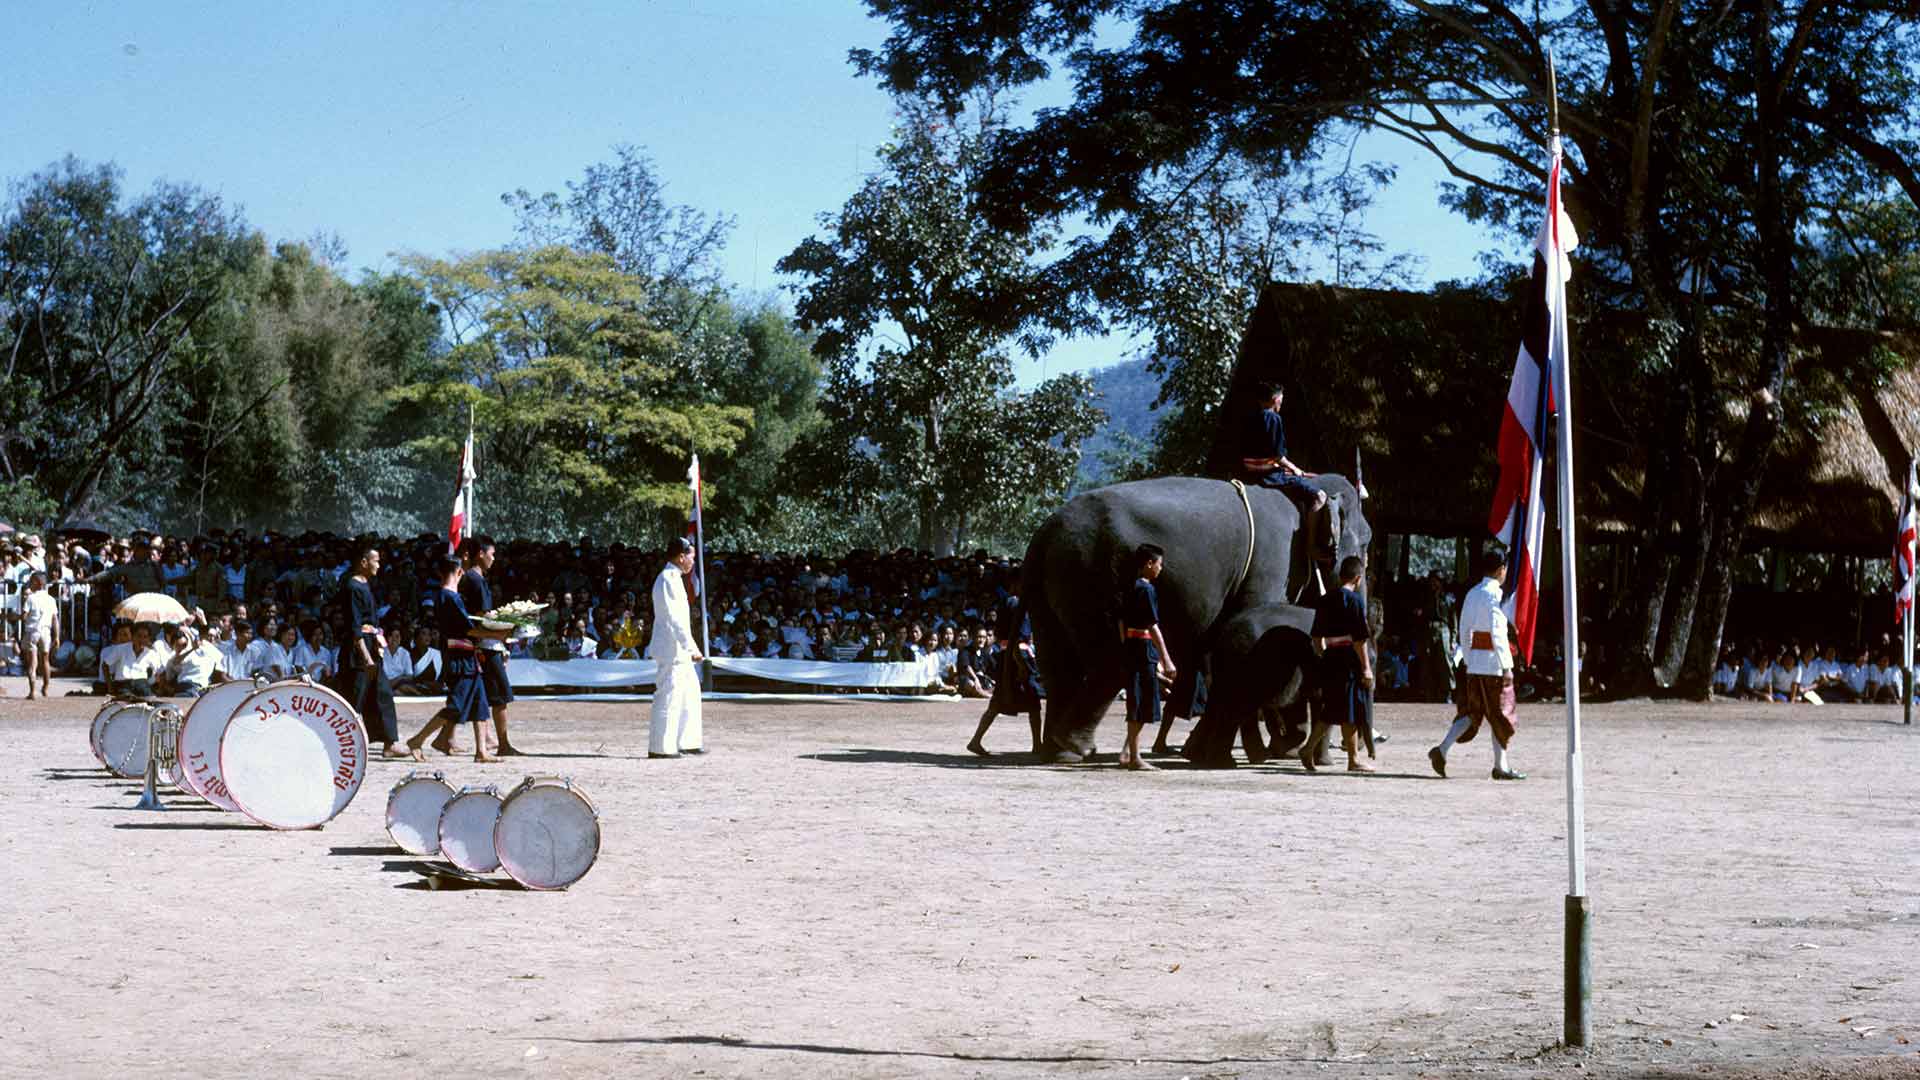 The presentation in Thailand of a white elephant to the late King H.M. Bhumibol Adulyadej  overview image